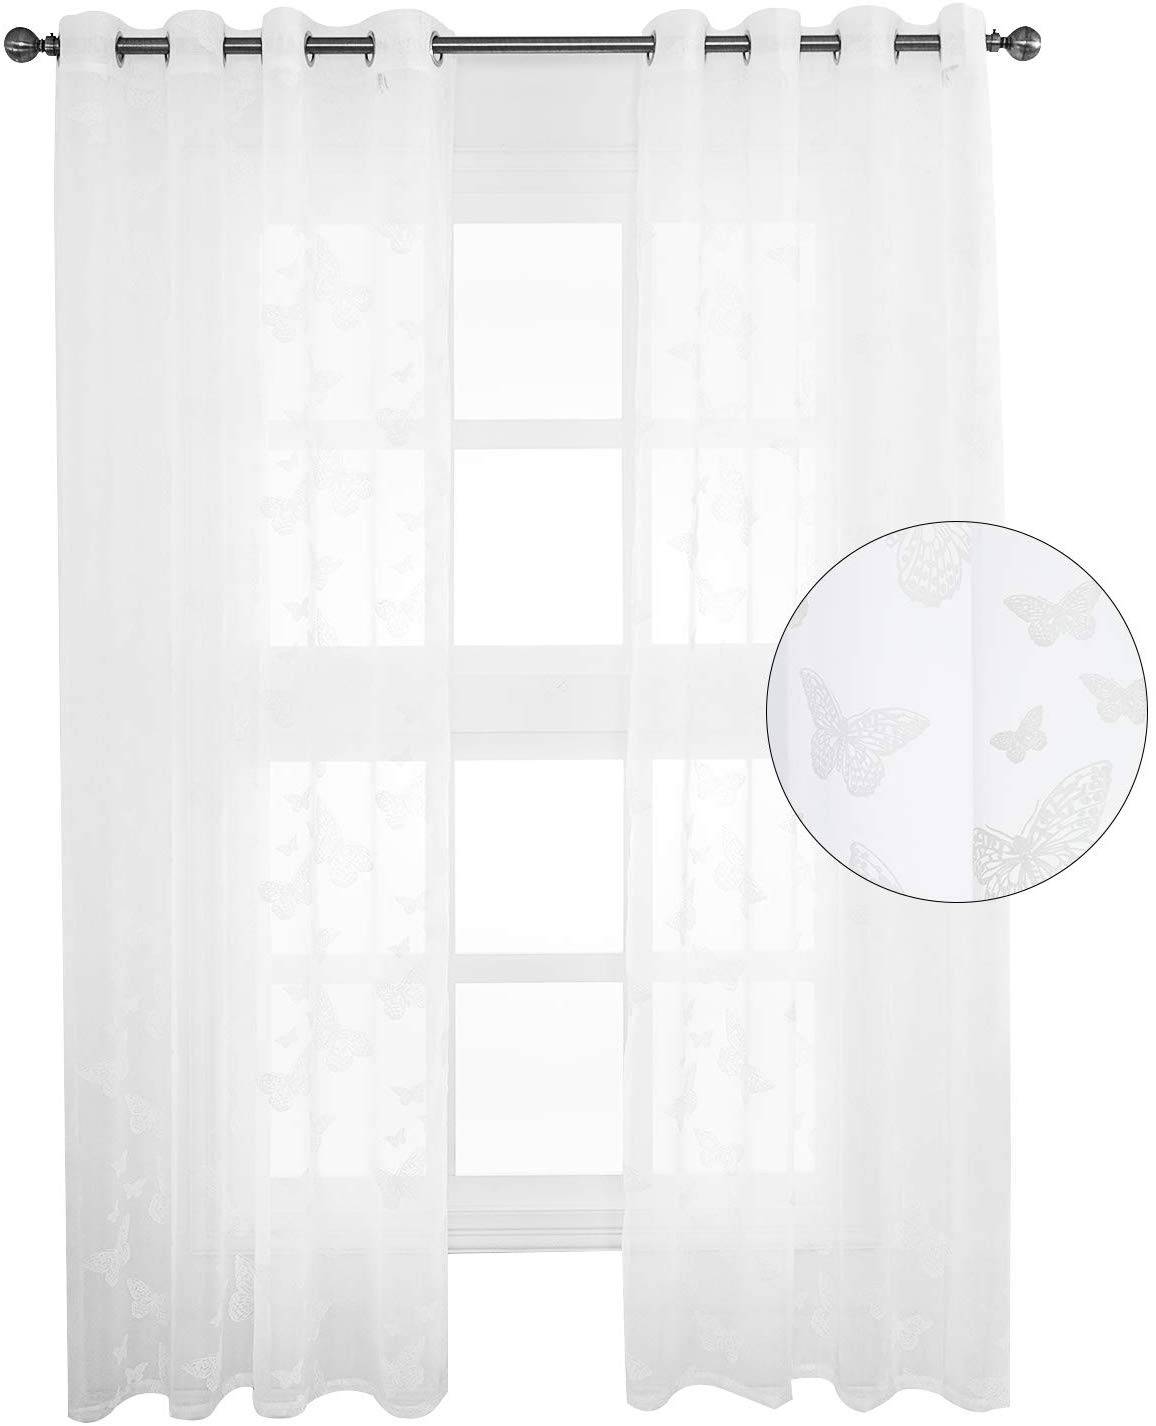 Sheer Voile Curtains Eyelet Ring Top, Voile White Curtains Eyelet